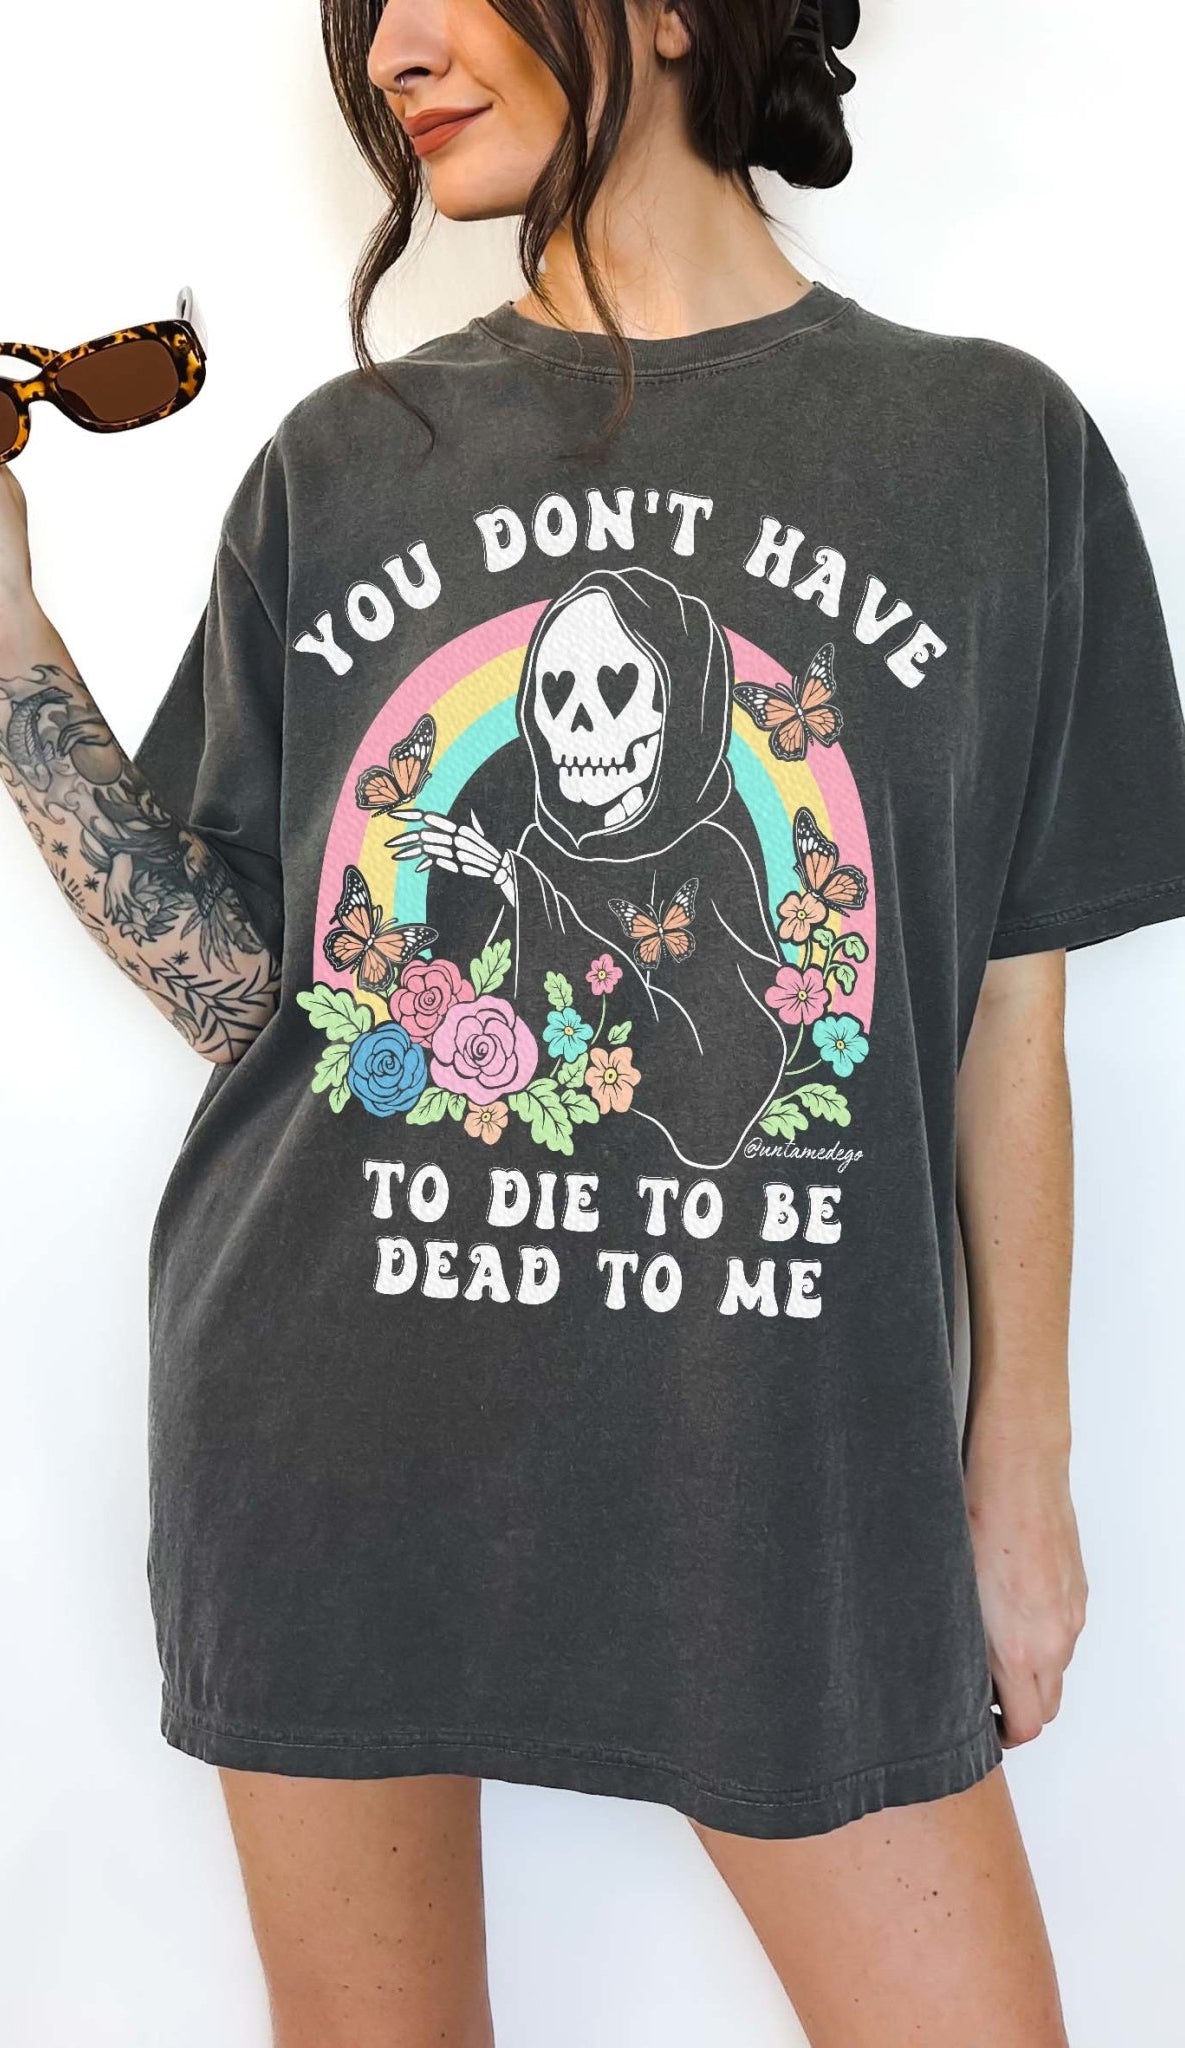 You Don't Have To Die To Be Dead To Me Unisex Tee - UntamedEgo LLC.